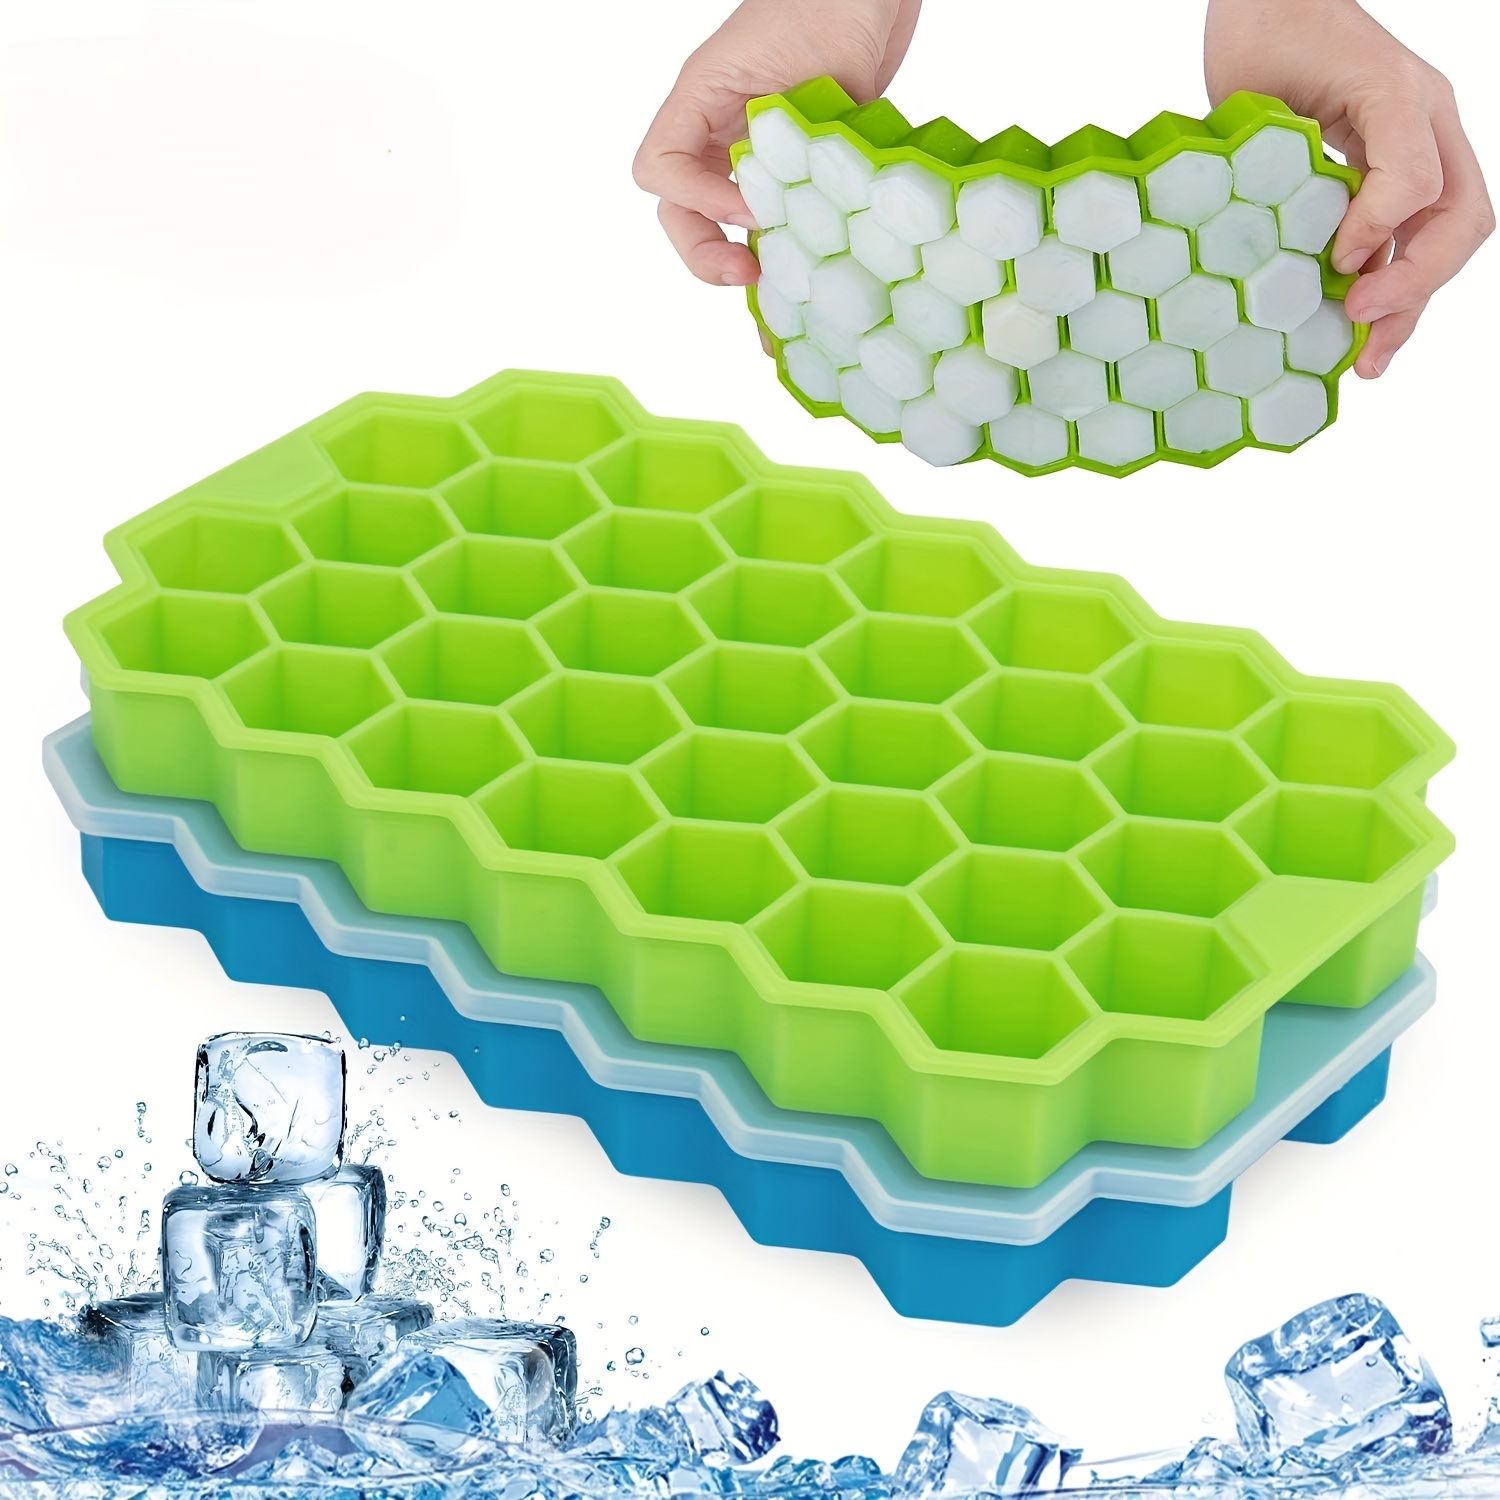 160 Grids Mini Ice Cube Mold Reusable Silicone Mould for DIY Making Small  Square Frozen Ice Cubes Tray For Freezer Drinks Whisky - AliExpress